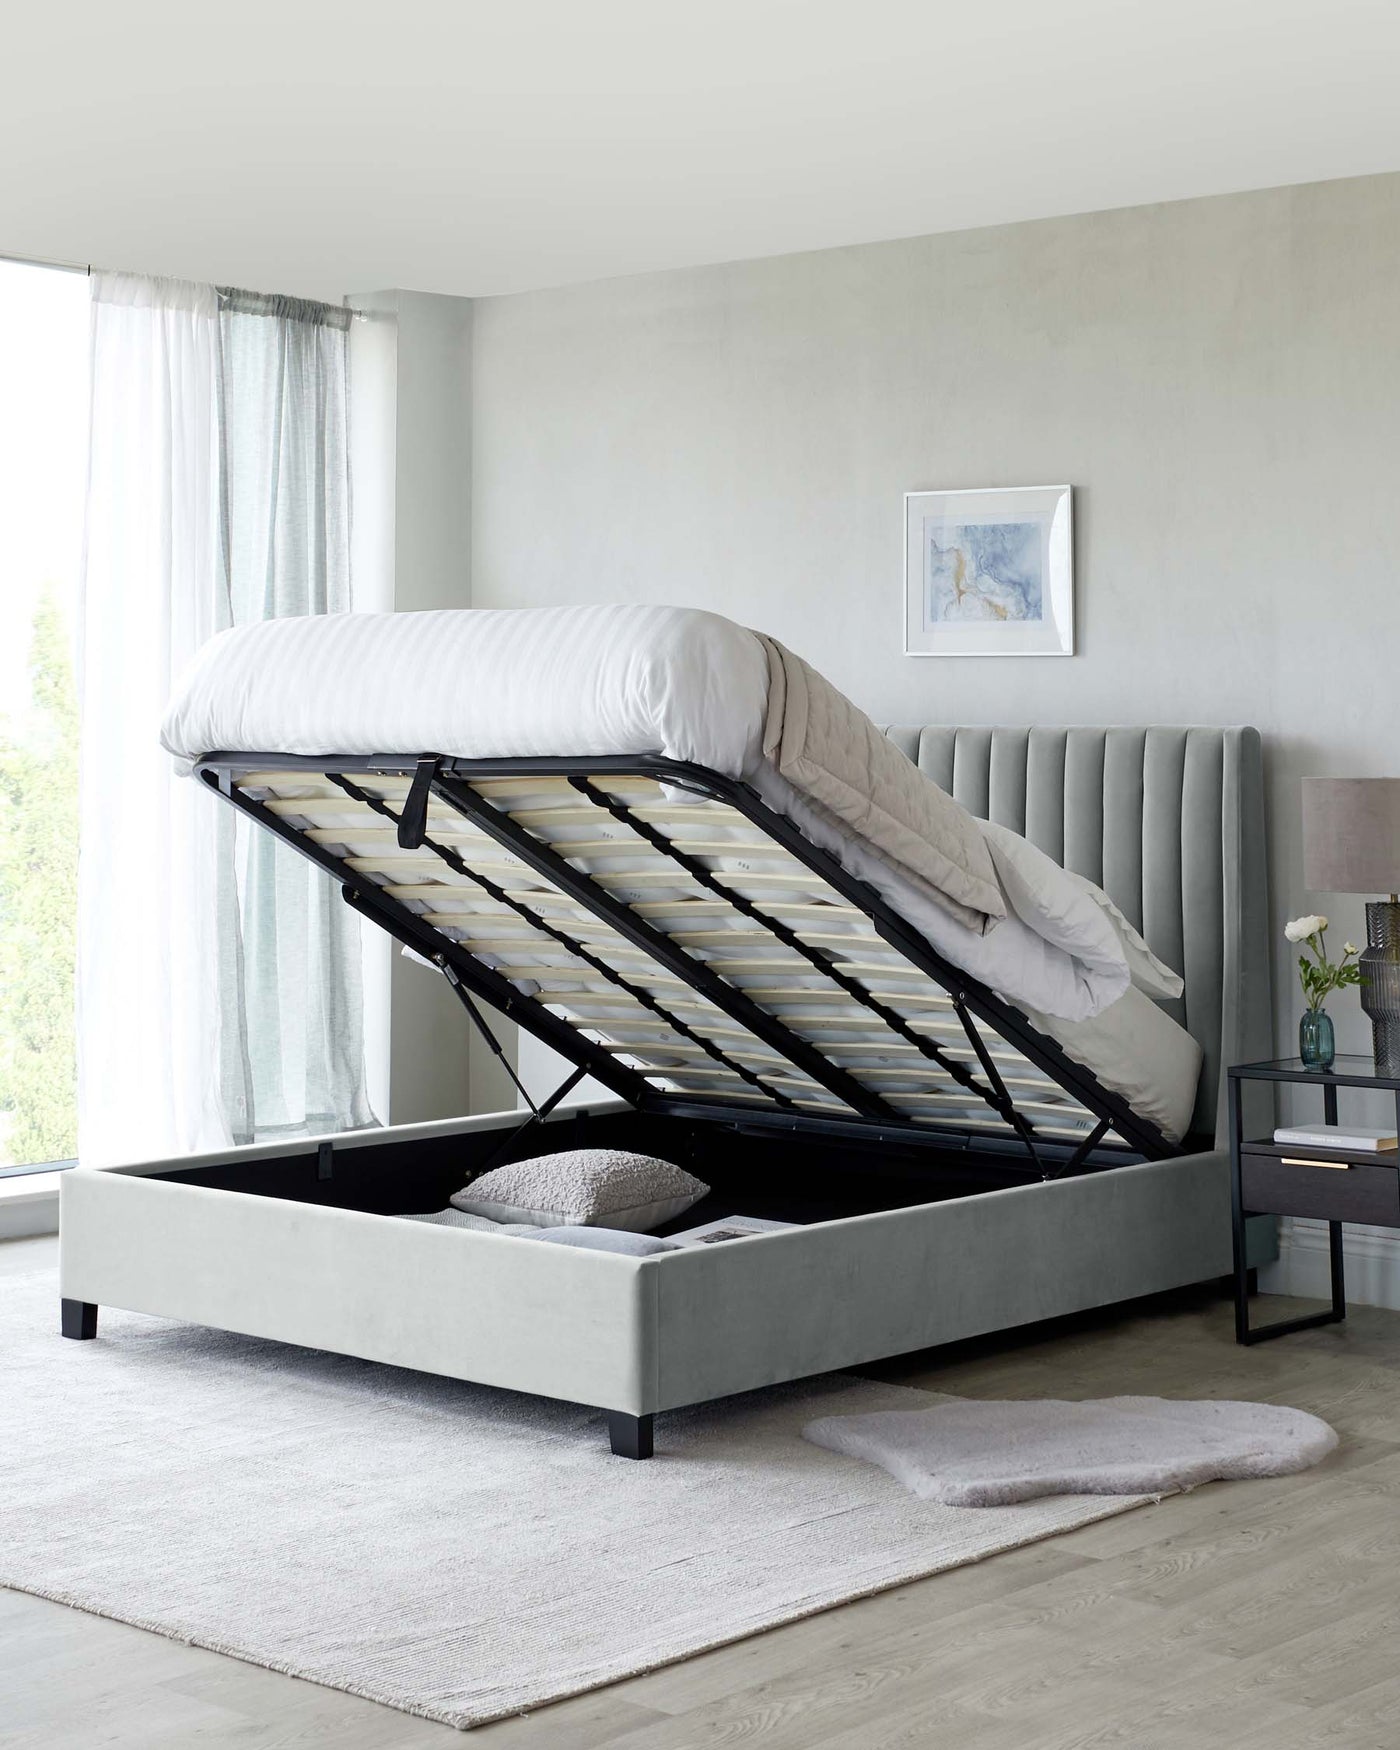 A modern upholstered storage bed with a lifting mattress revealing a spacious under-bed storage compartment. The bed features a tufted headboard in a light grey fabric and a matching frame, sitting on black square legs. A white rug is partially visible beneath the bed, and beside the bed stands a contemporary nightstand with a dark finish, a drawer, and an open shelf, hosting a lamp and books.